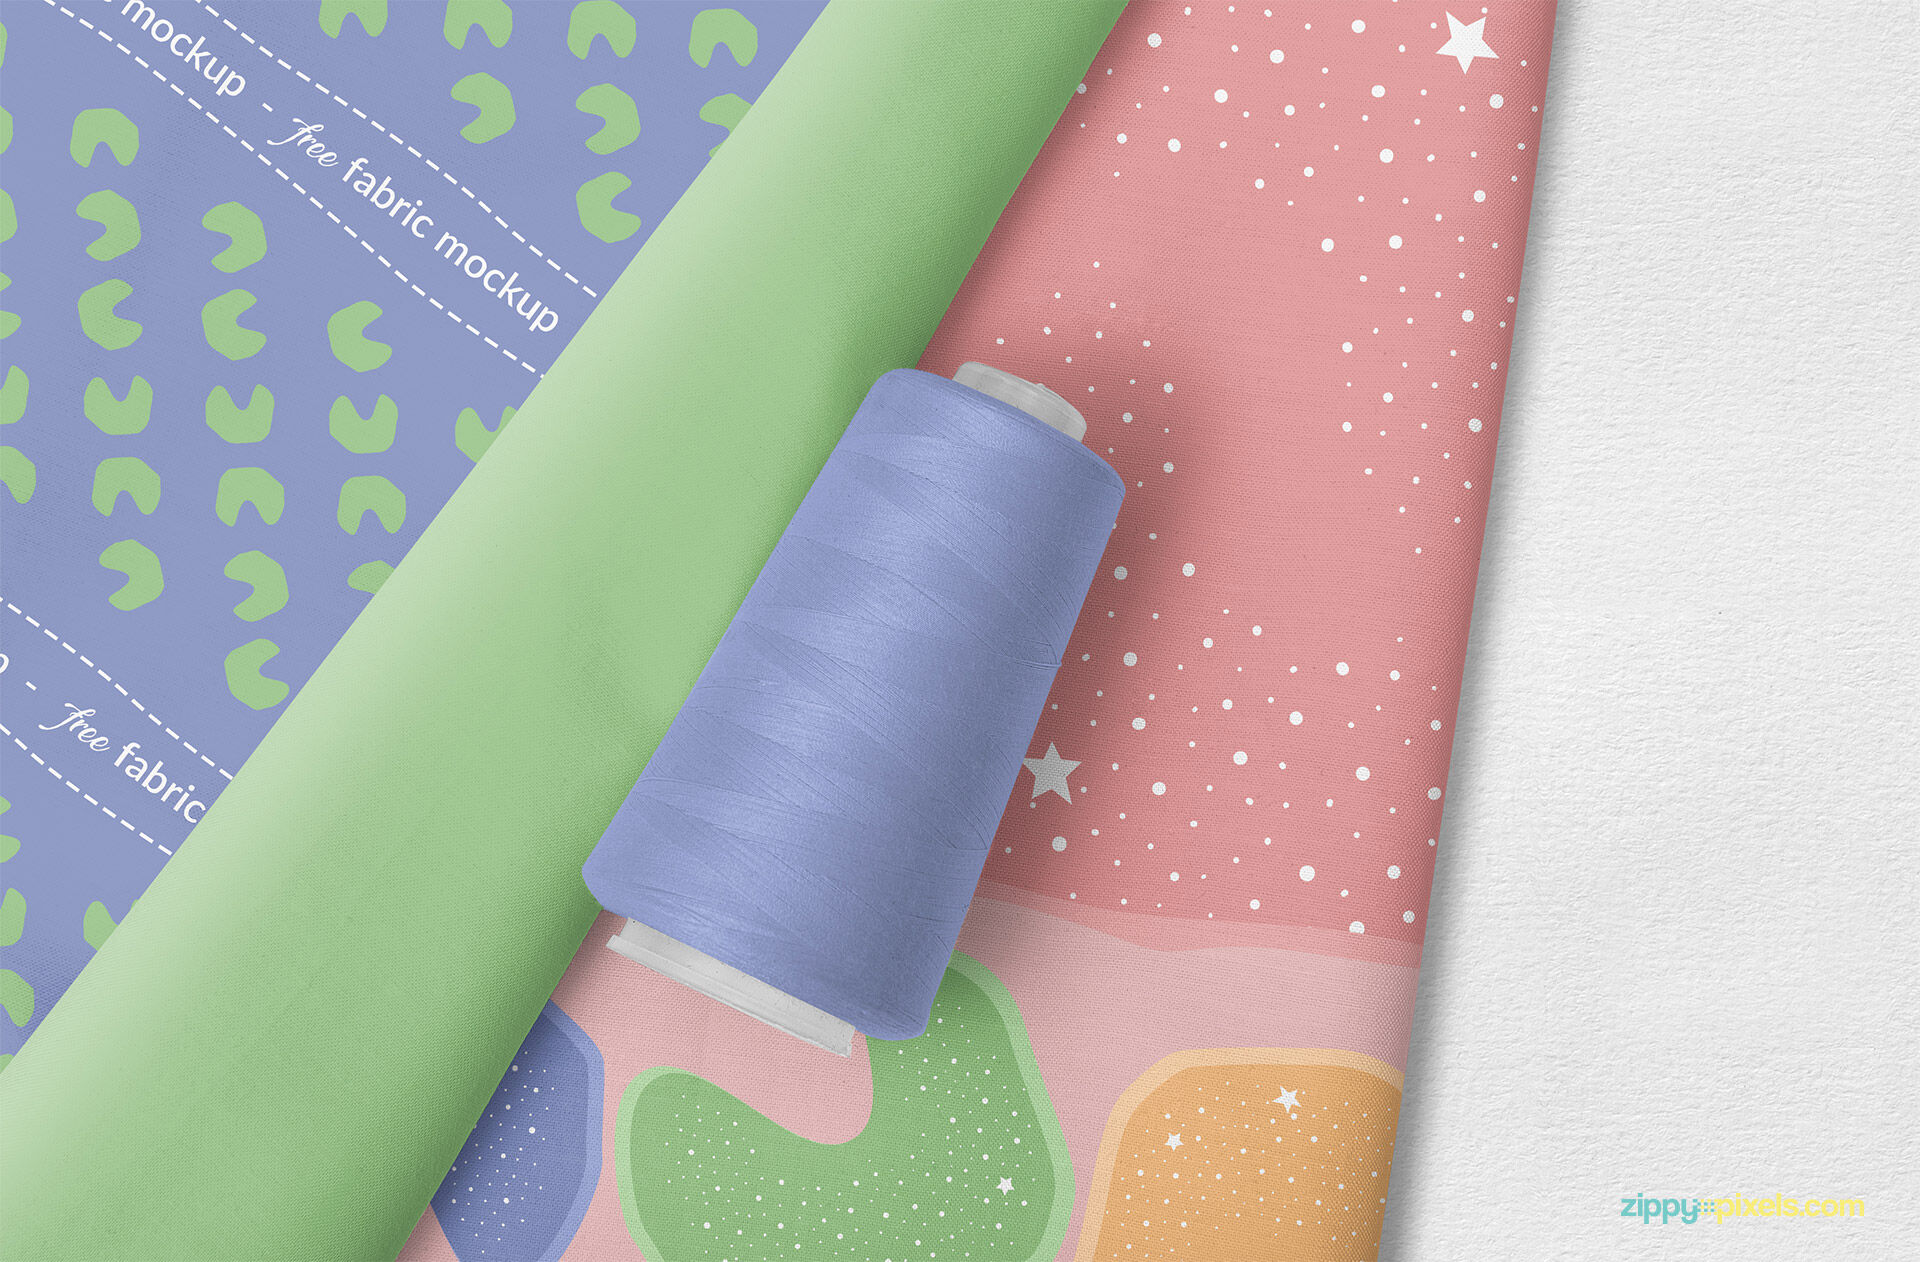 Photorealistic Fabric with a Thread Cone Mockup FREE PSD